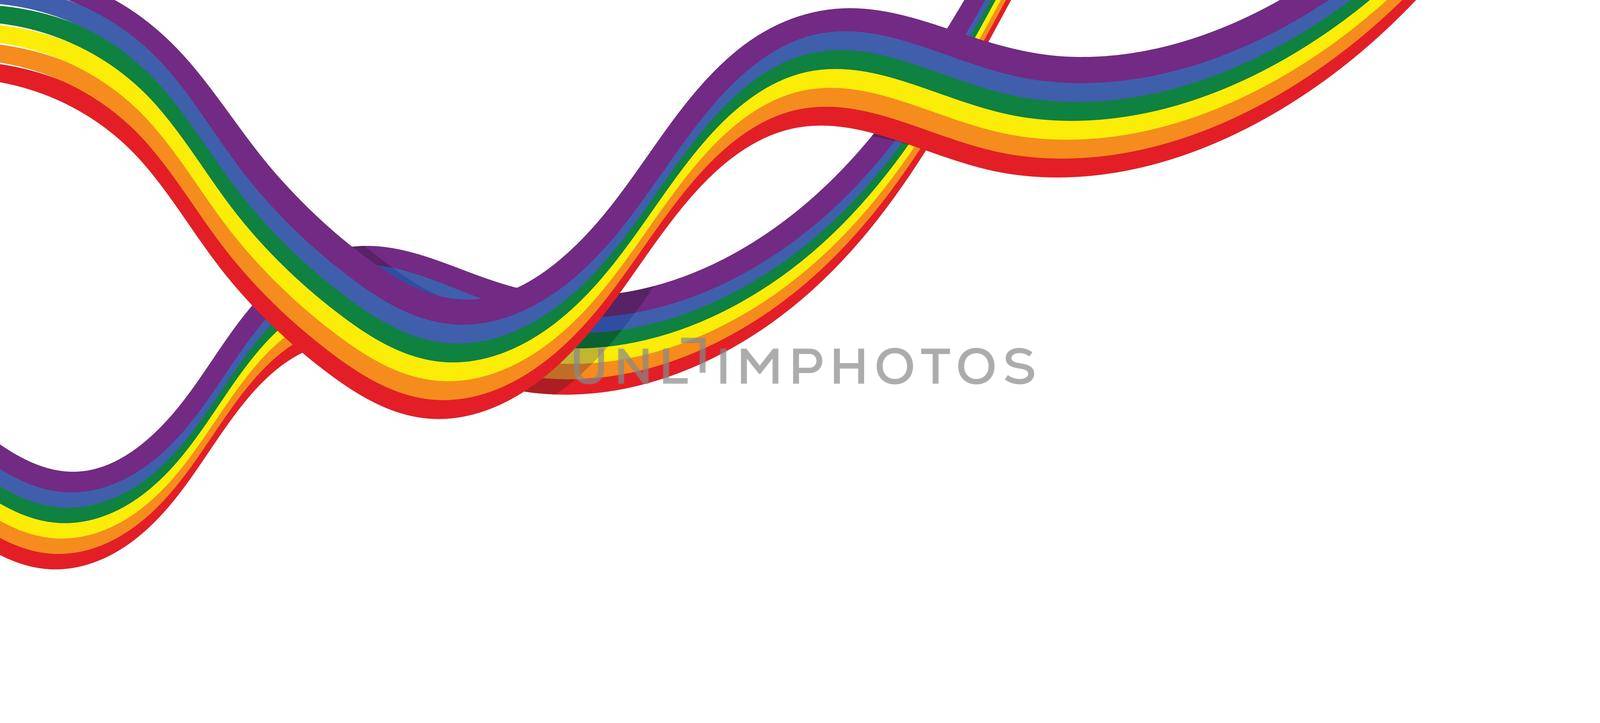 LGBT ribbon, tape. LGBT banner. Template design, vector illustration. Geometric shapes in the colors on the rainbow. Colorful symbols. Gay pride collection. Copy space.